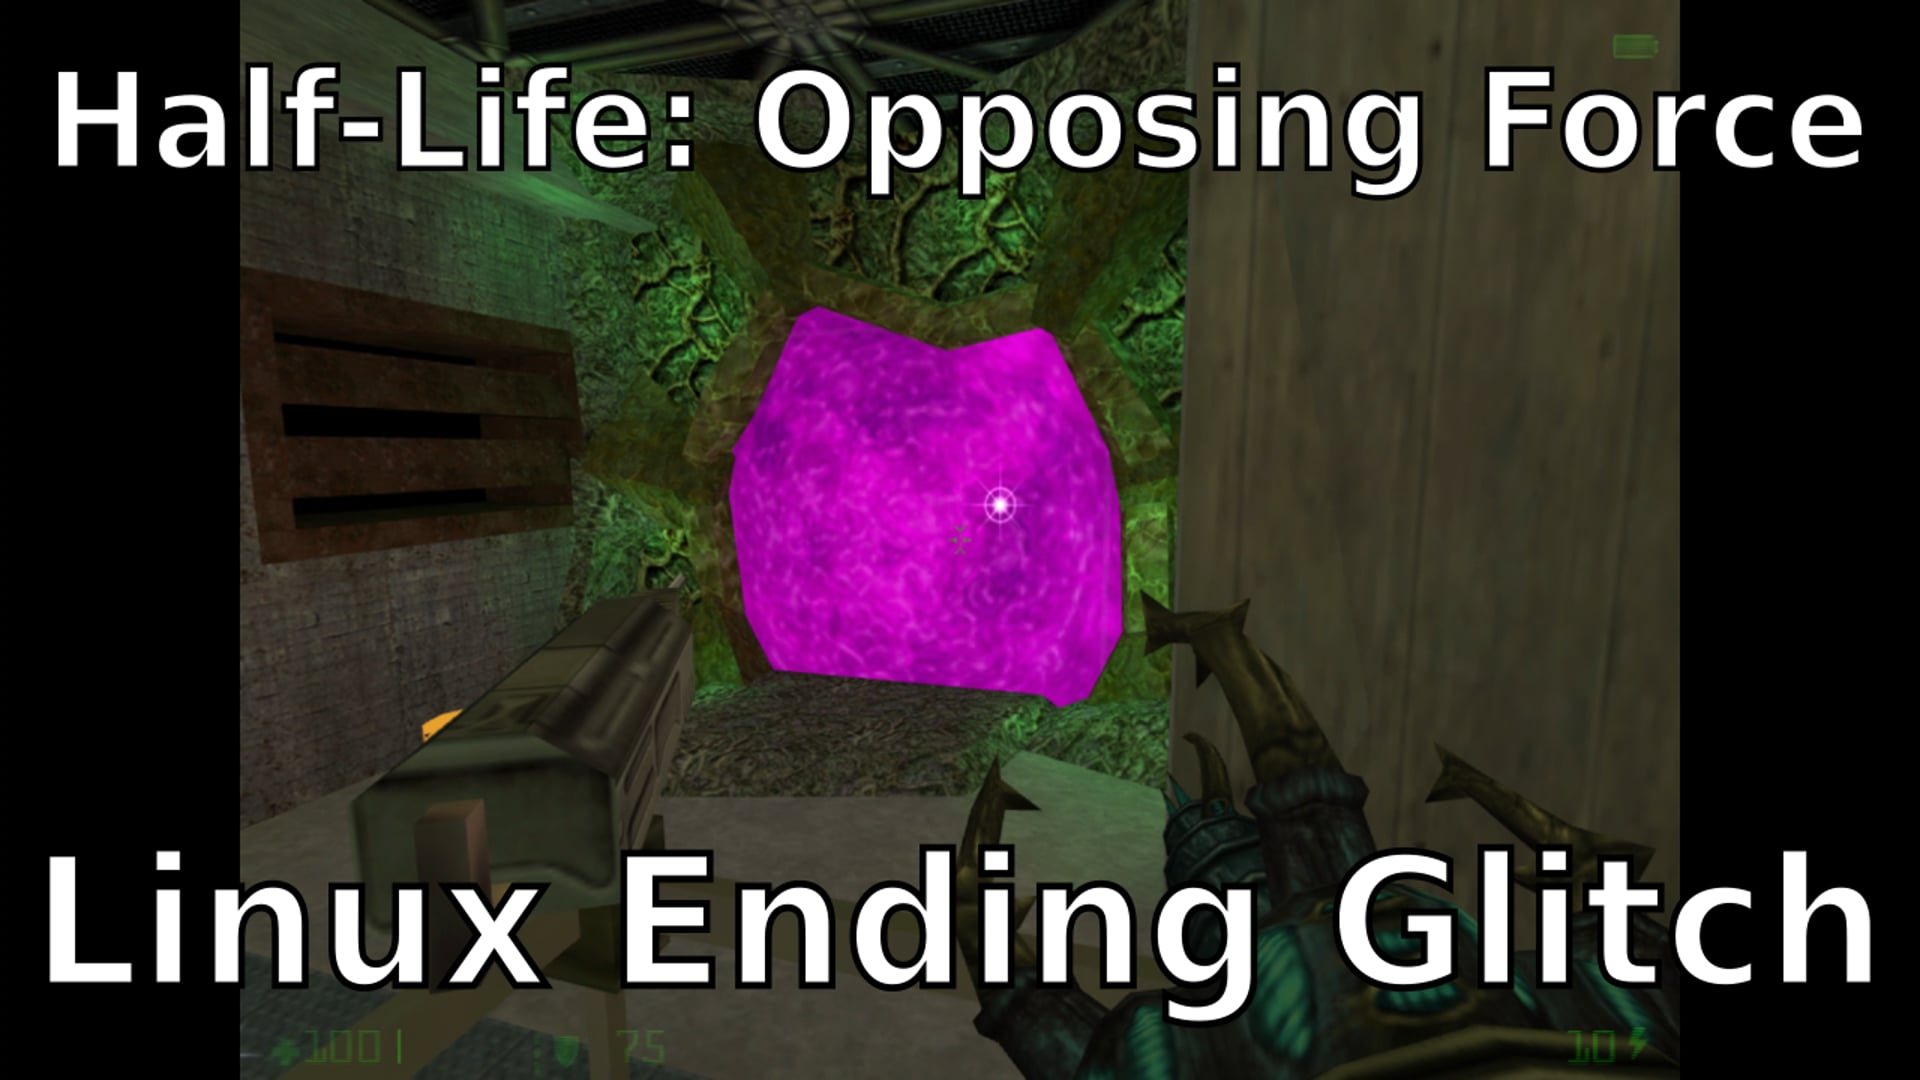 Half-Life: Opposing Force - Linux Ending Glitch